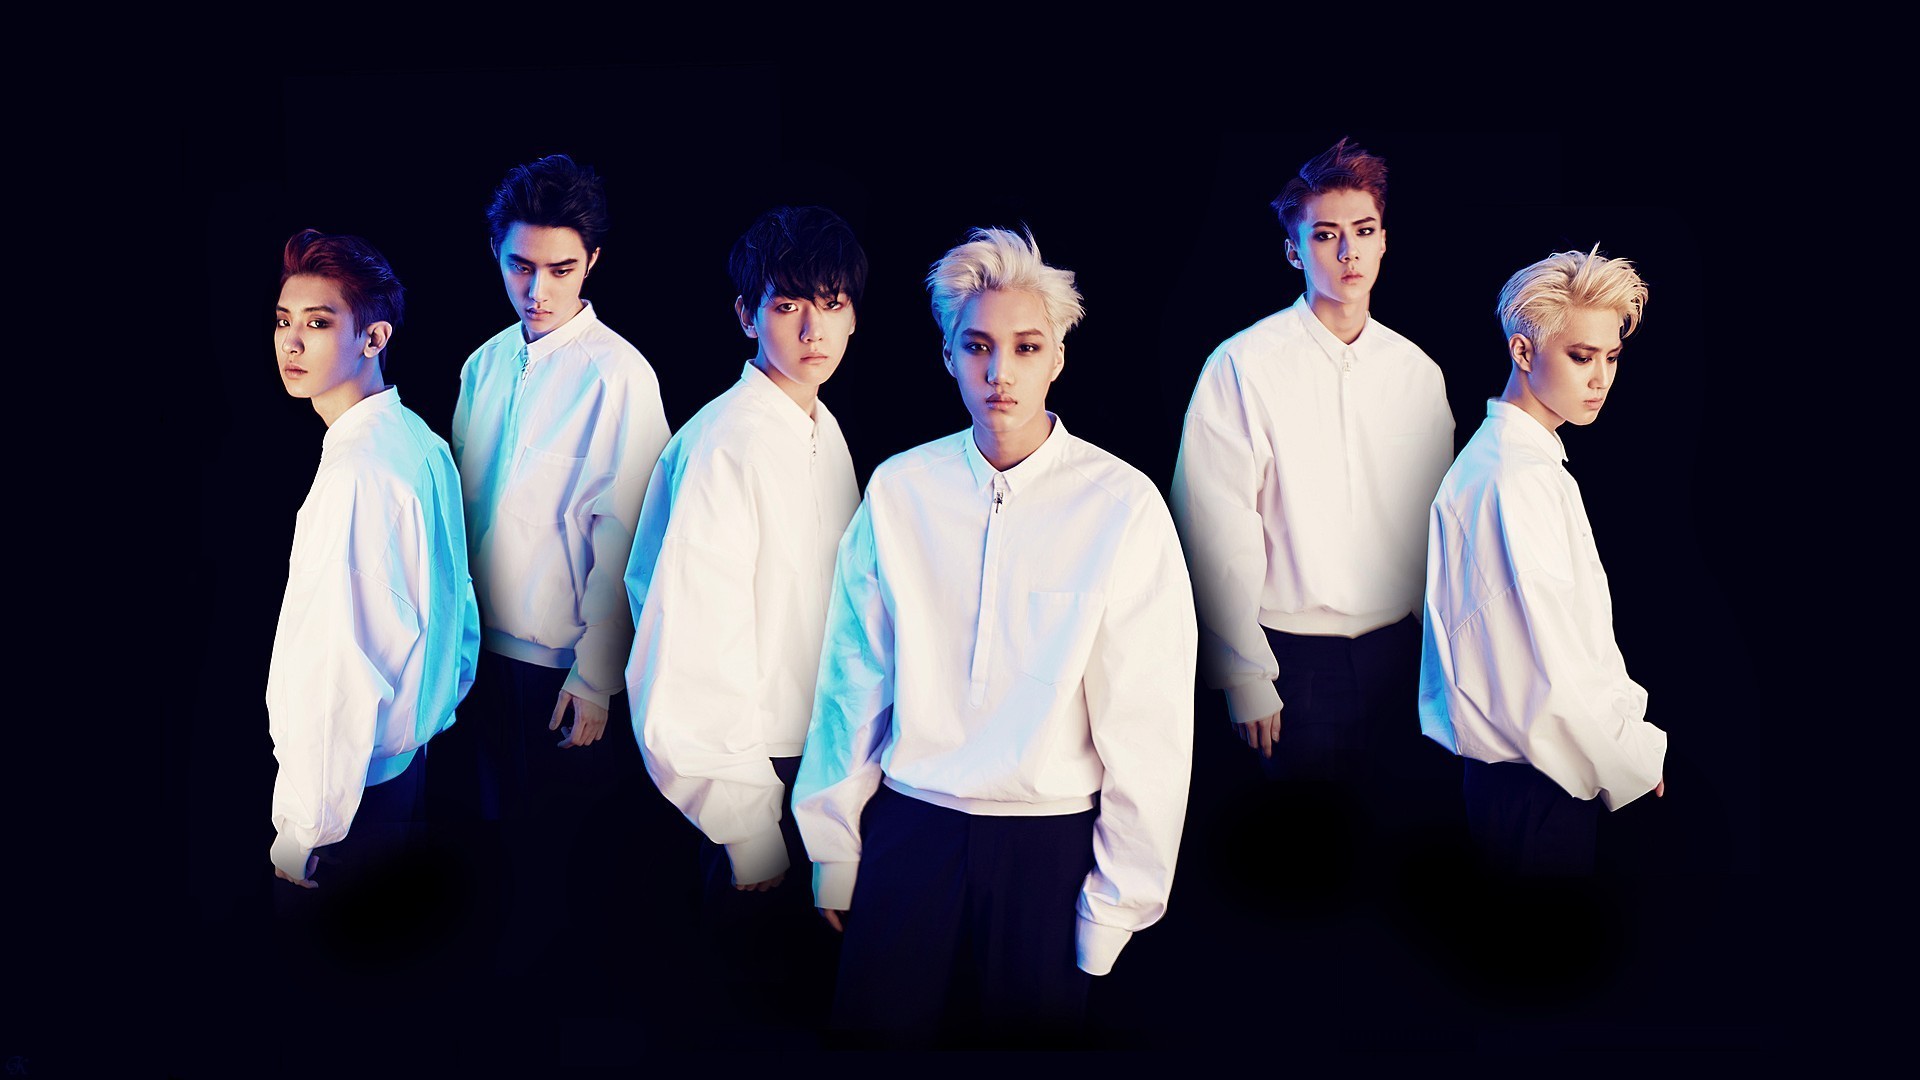 Teaser images for K pop group EXOs 2014 comeback mini album. The title track has been revealed as Overdose. Click pictures for HD